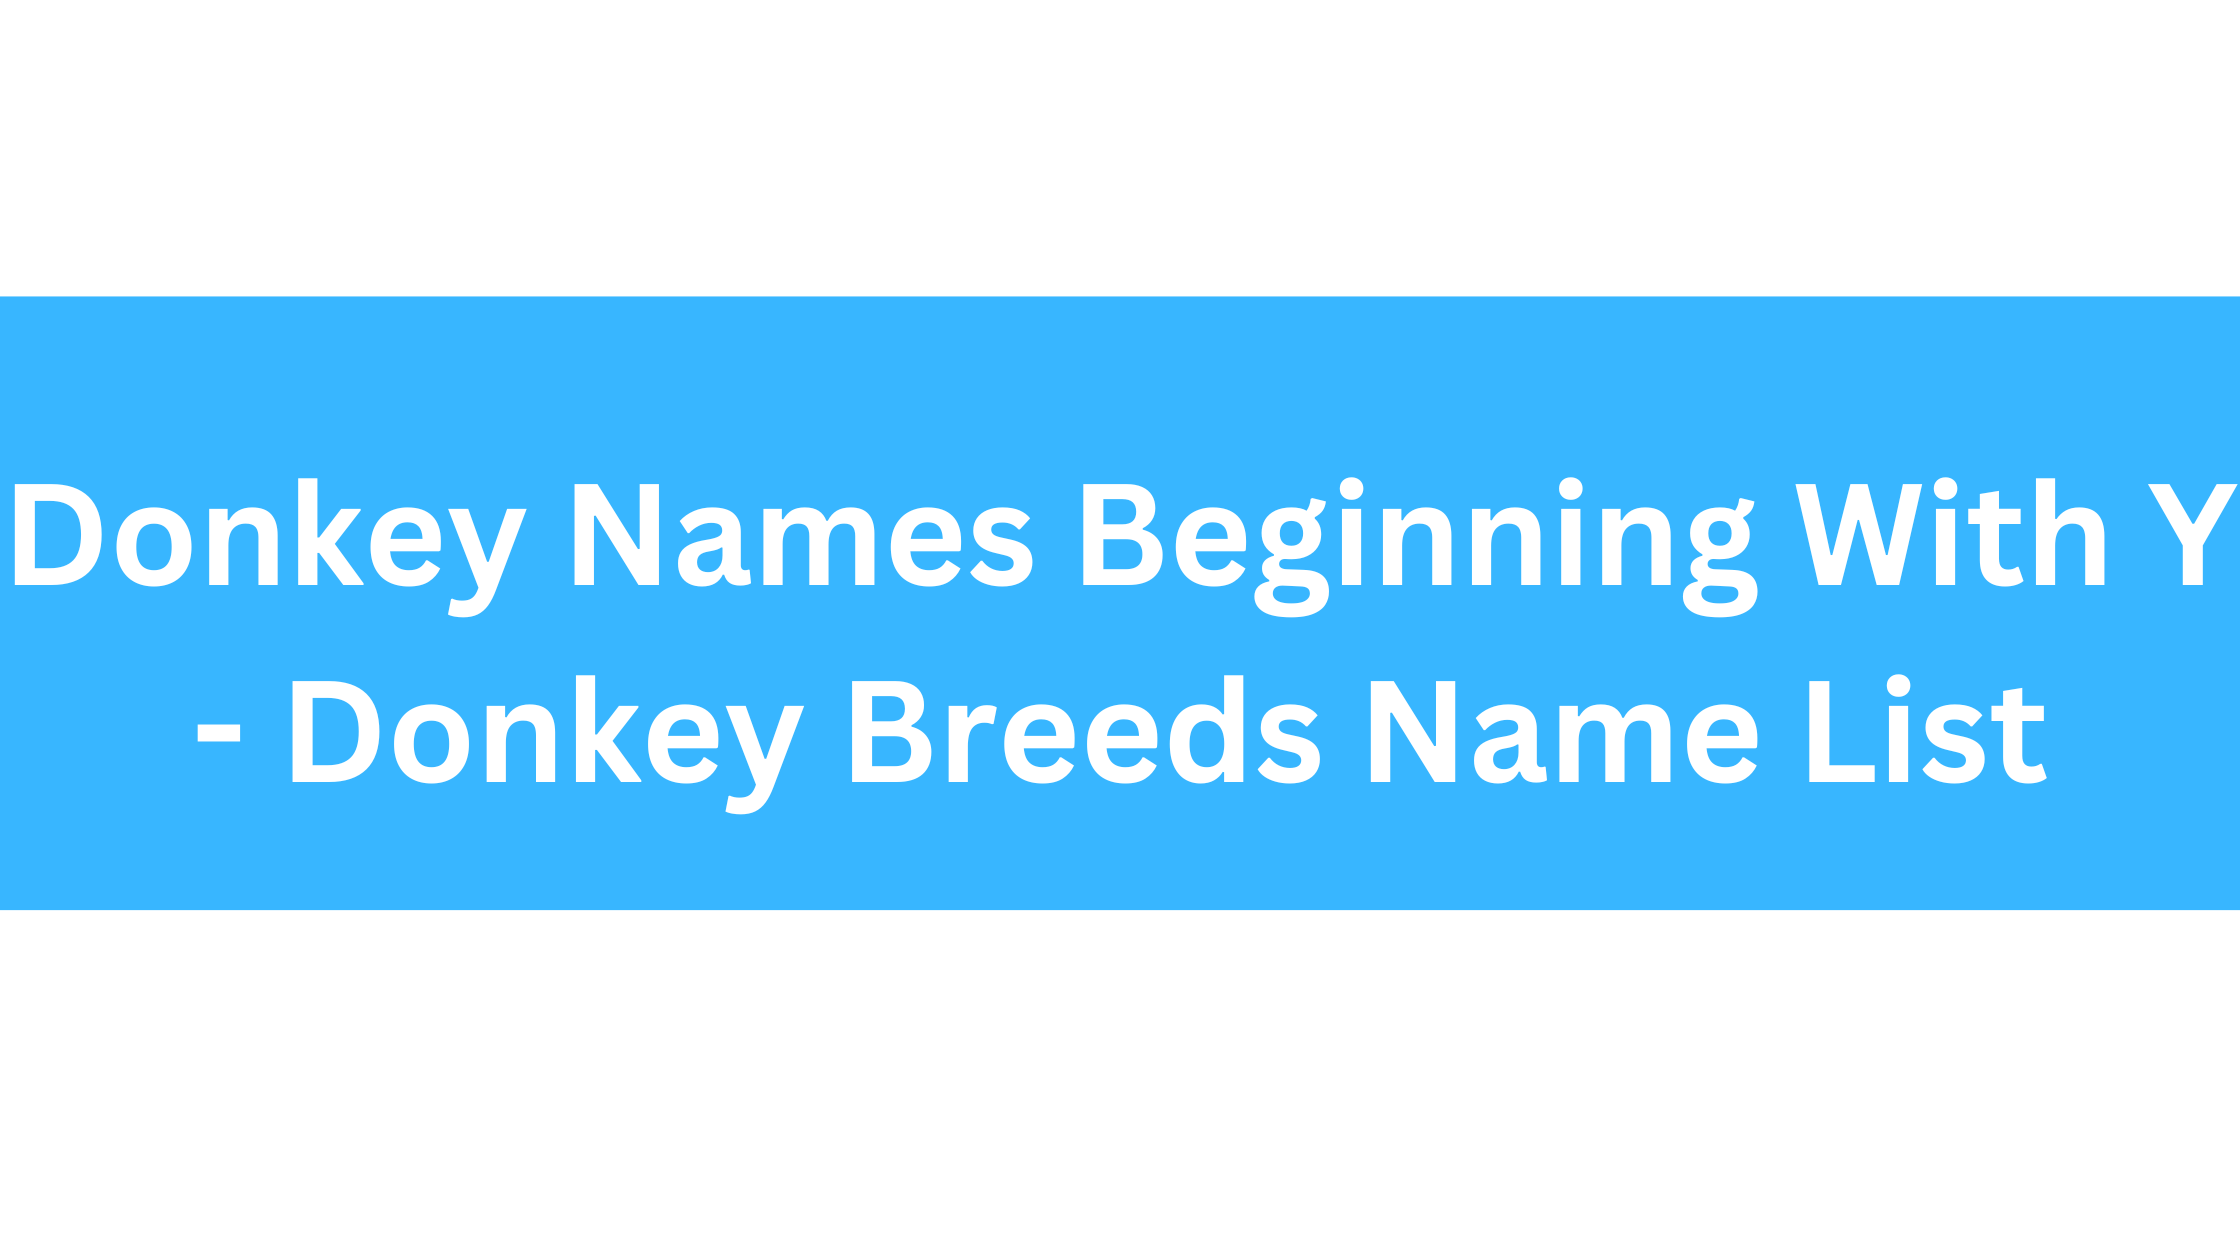 Donkey Names Beginning With Y